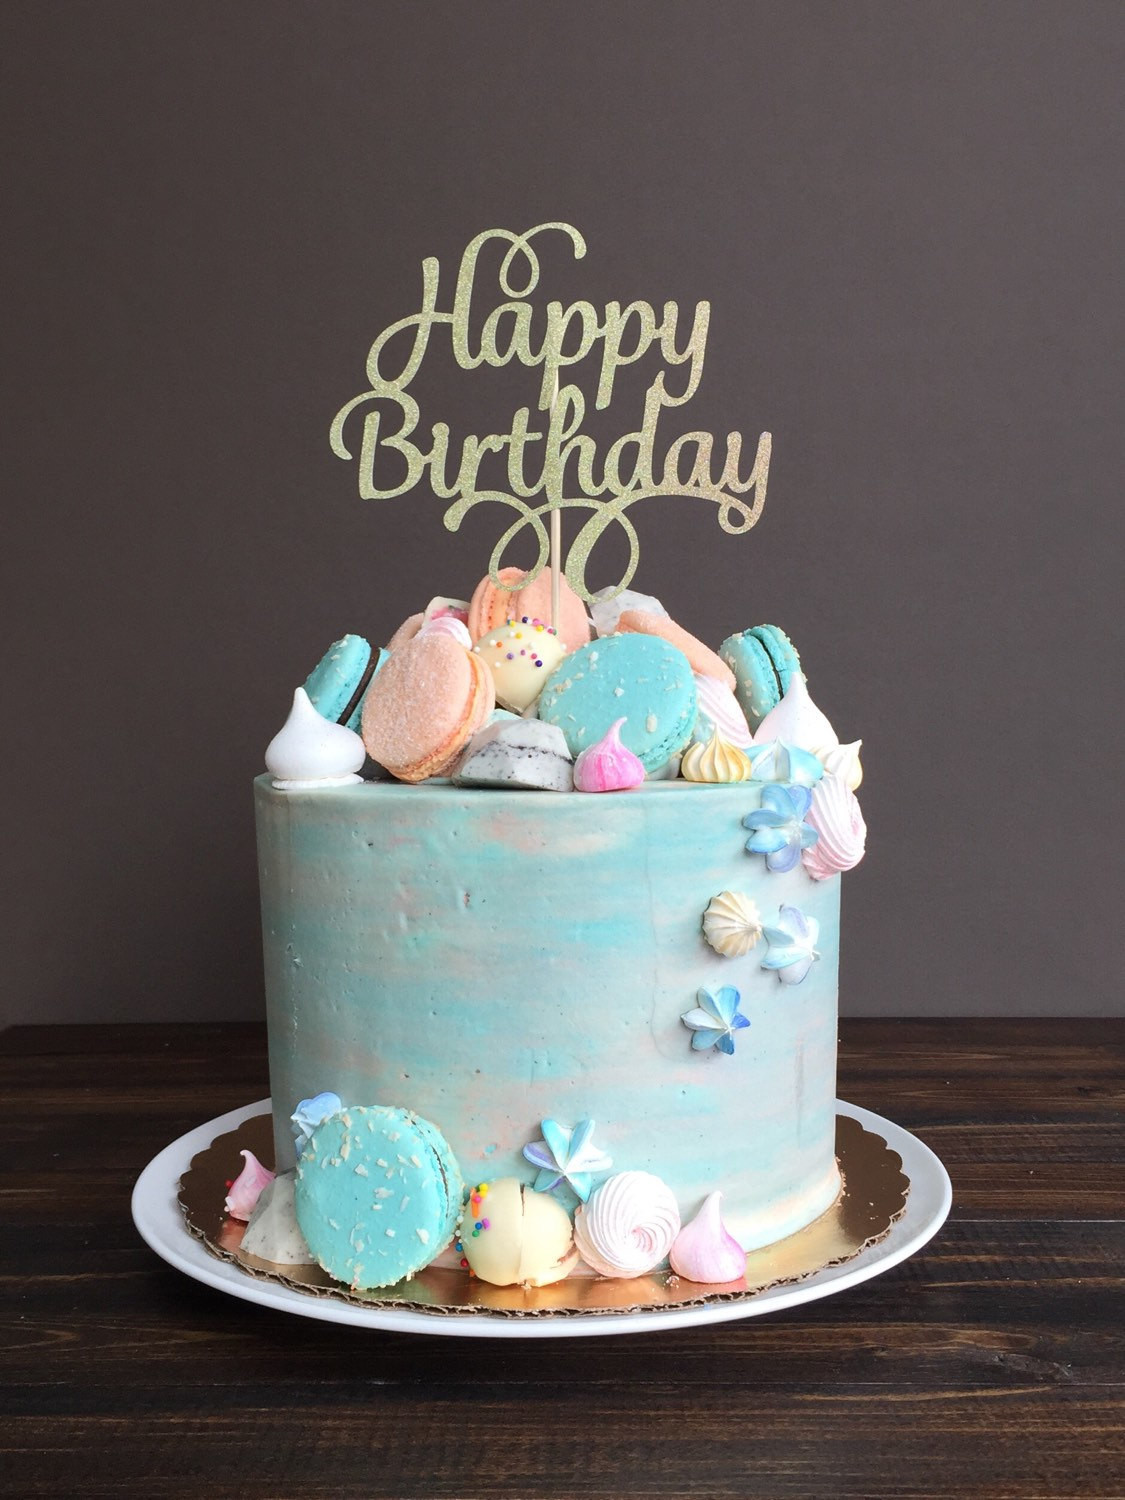 Best ideas about Happy Birthday Cake
. Save or Pin Cake topper Happy Birthday cake topper birthday cake Now.